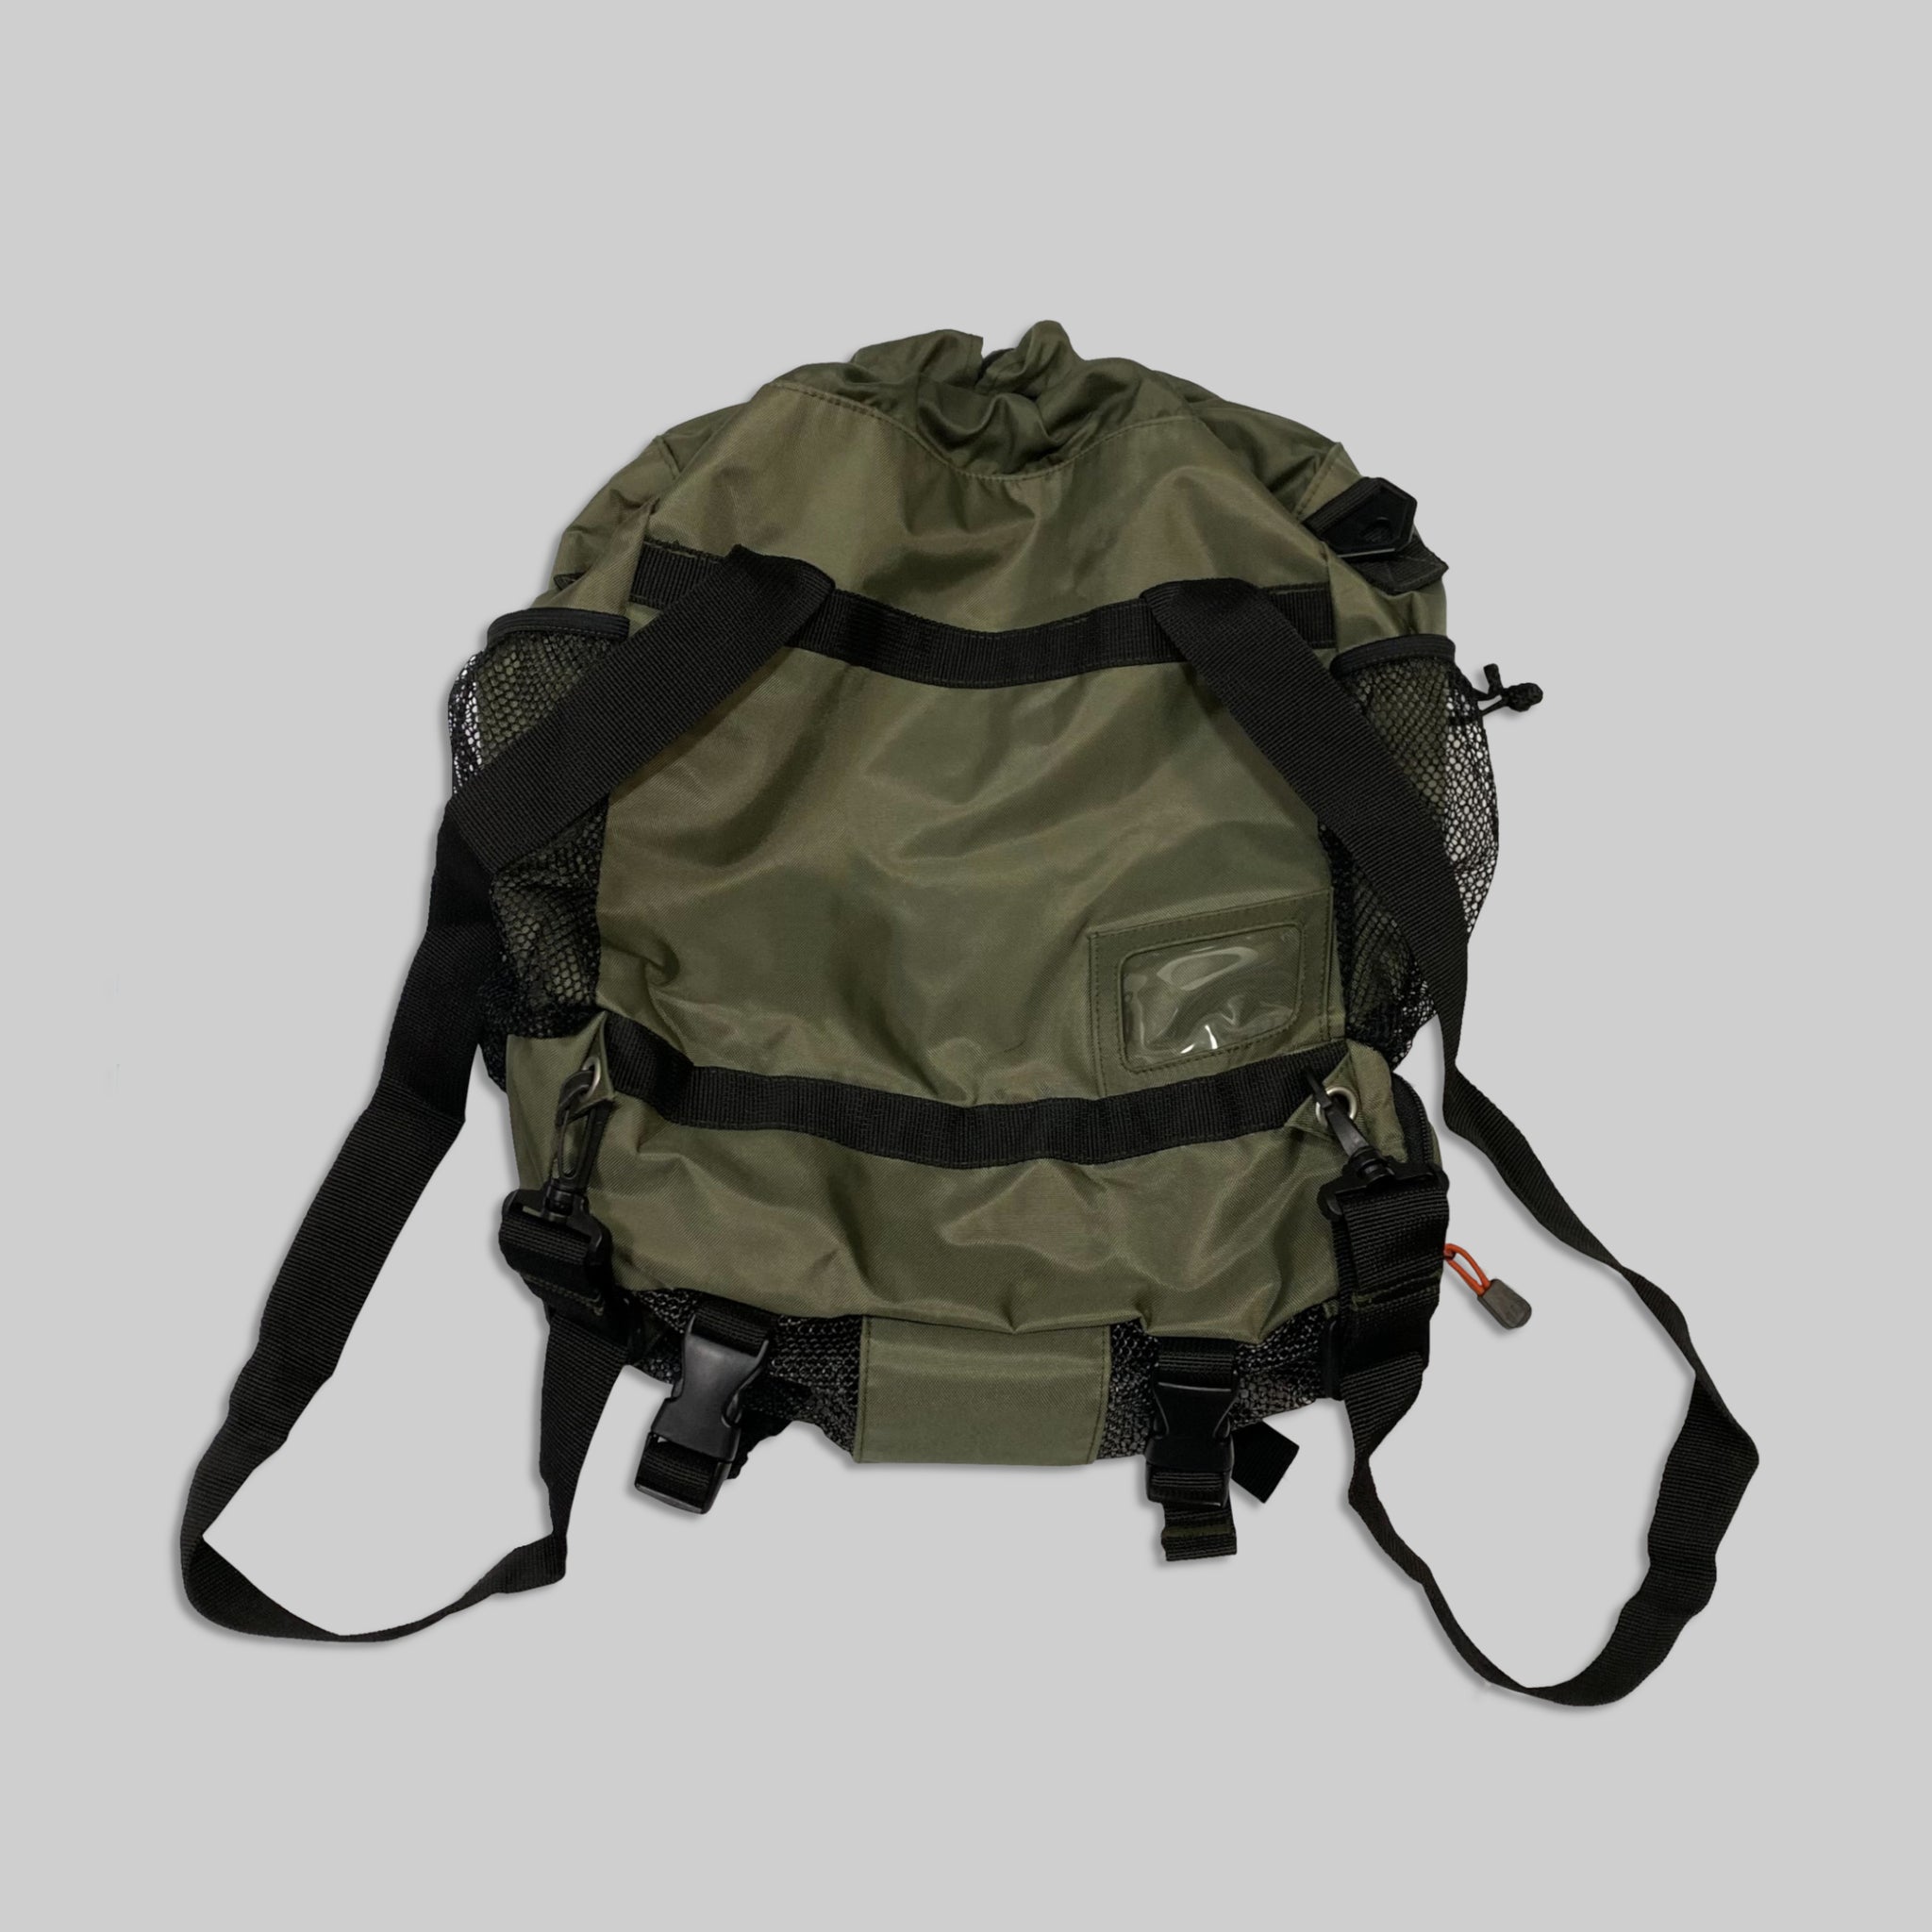 Old Gap 2way tactical multi gimmick bagCONDITION710